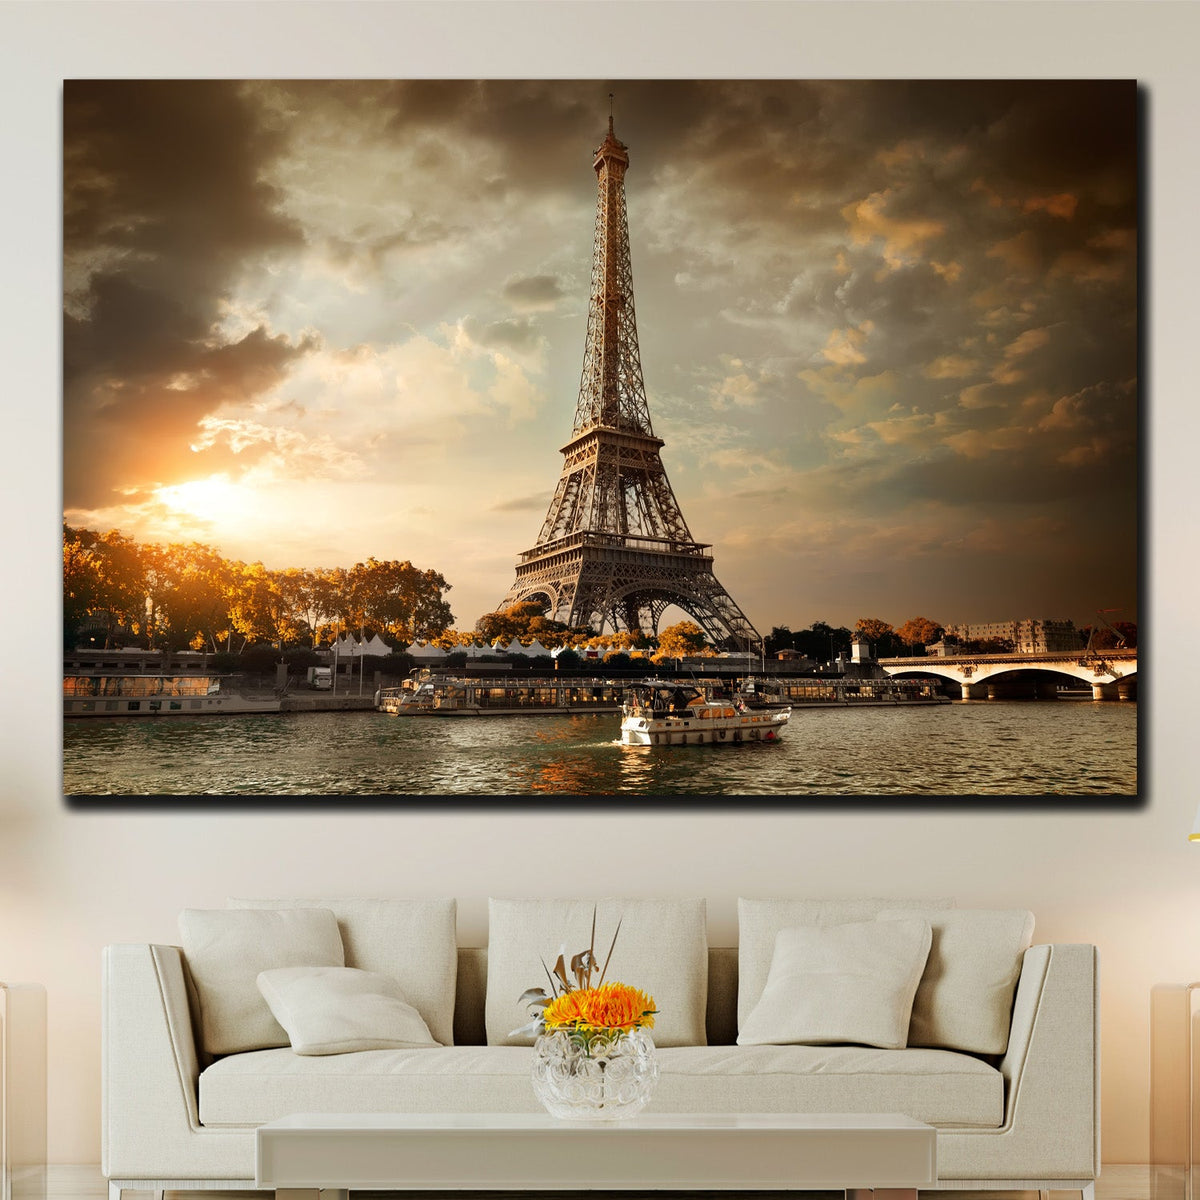 https://cdn.shopify.com/s/files/1/0387/9986/8044/products/CloudsoverEiffelTowerCanvasArtprintStretched-2.jpg